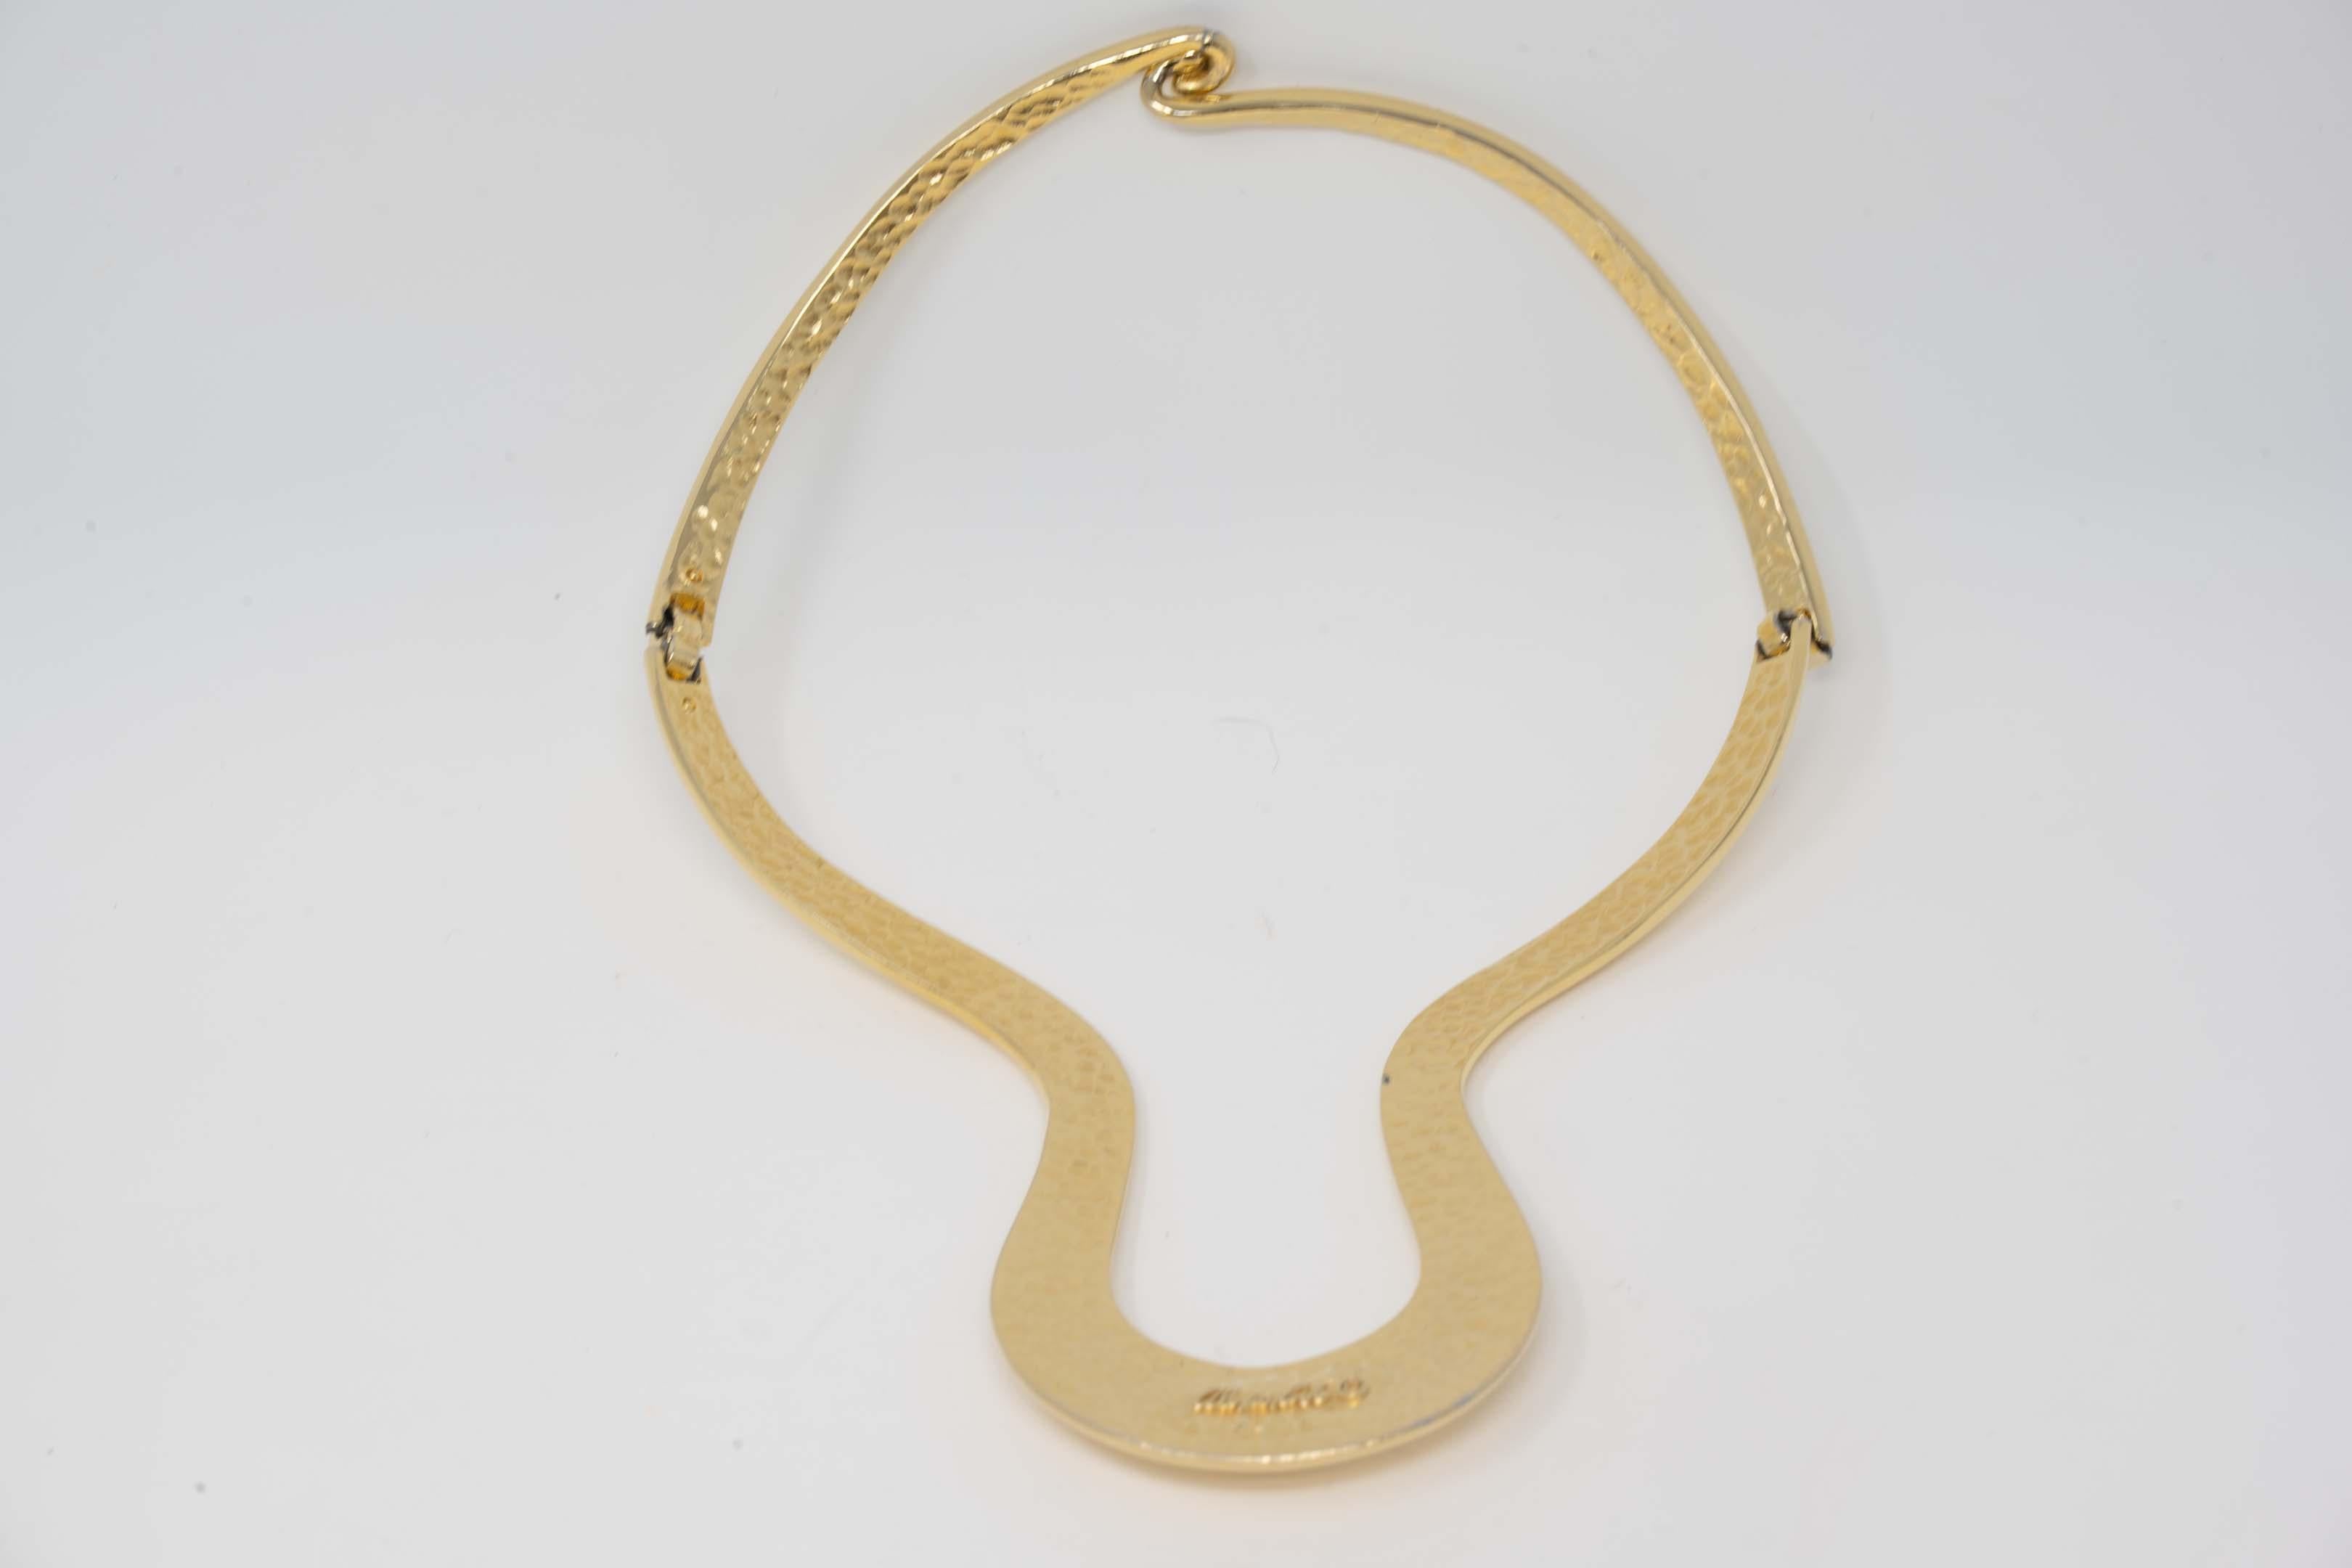 Vintage Alexis Kirk articulated gold tone choker necklace Made in New York, USA, circa 1980. Measures 16 inches around the neck, 8 inches long x 1 inch wide at the bottom. In good condition, wear is consistent with age, and preowned.